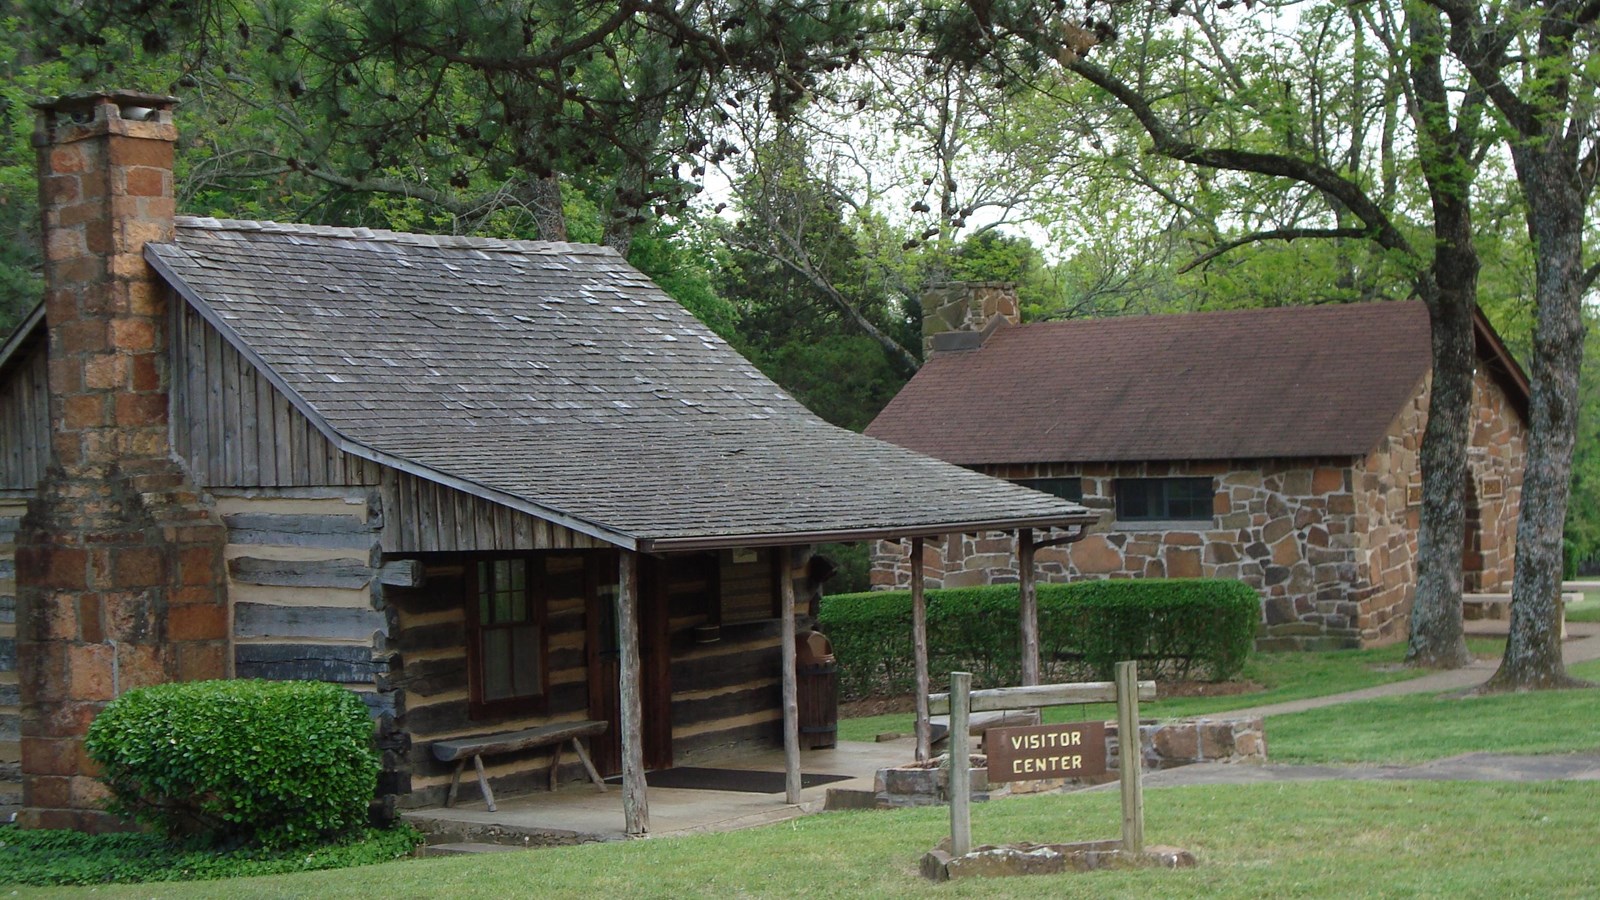 A historic, small log cabin, with an awning, sits in front of a distant small stone cabin in forest.